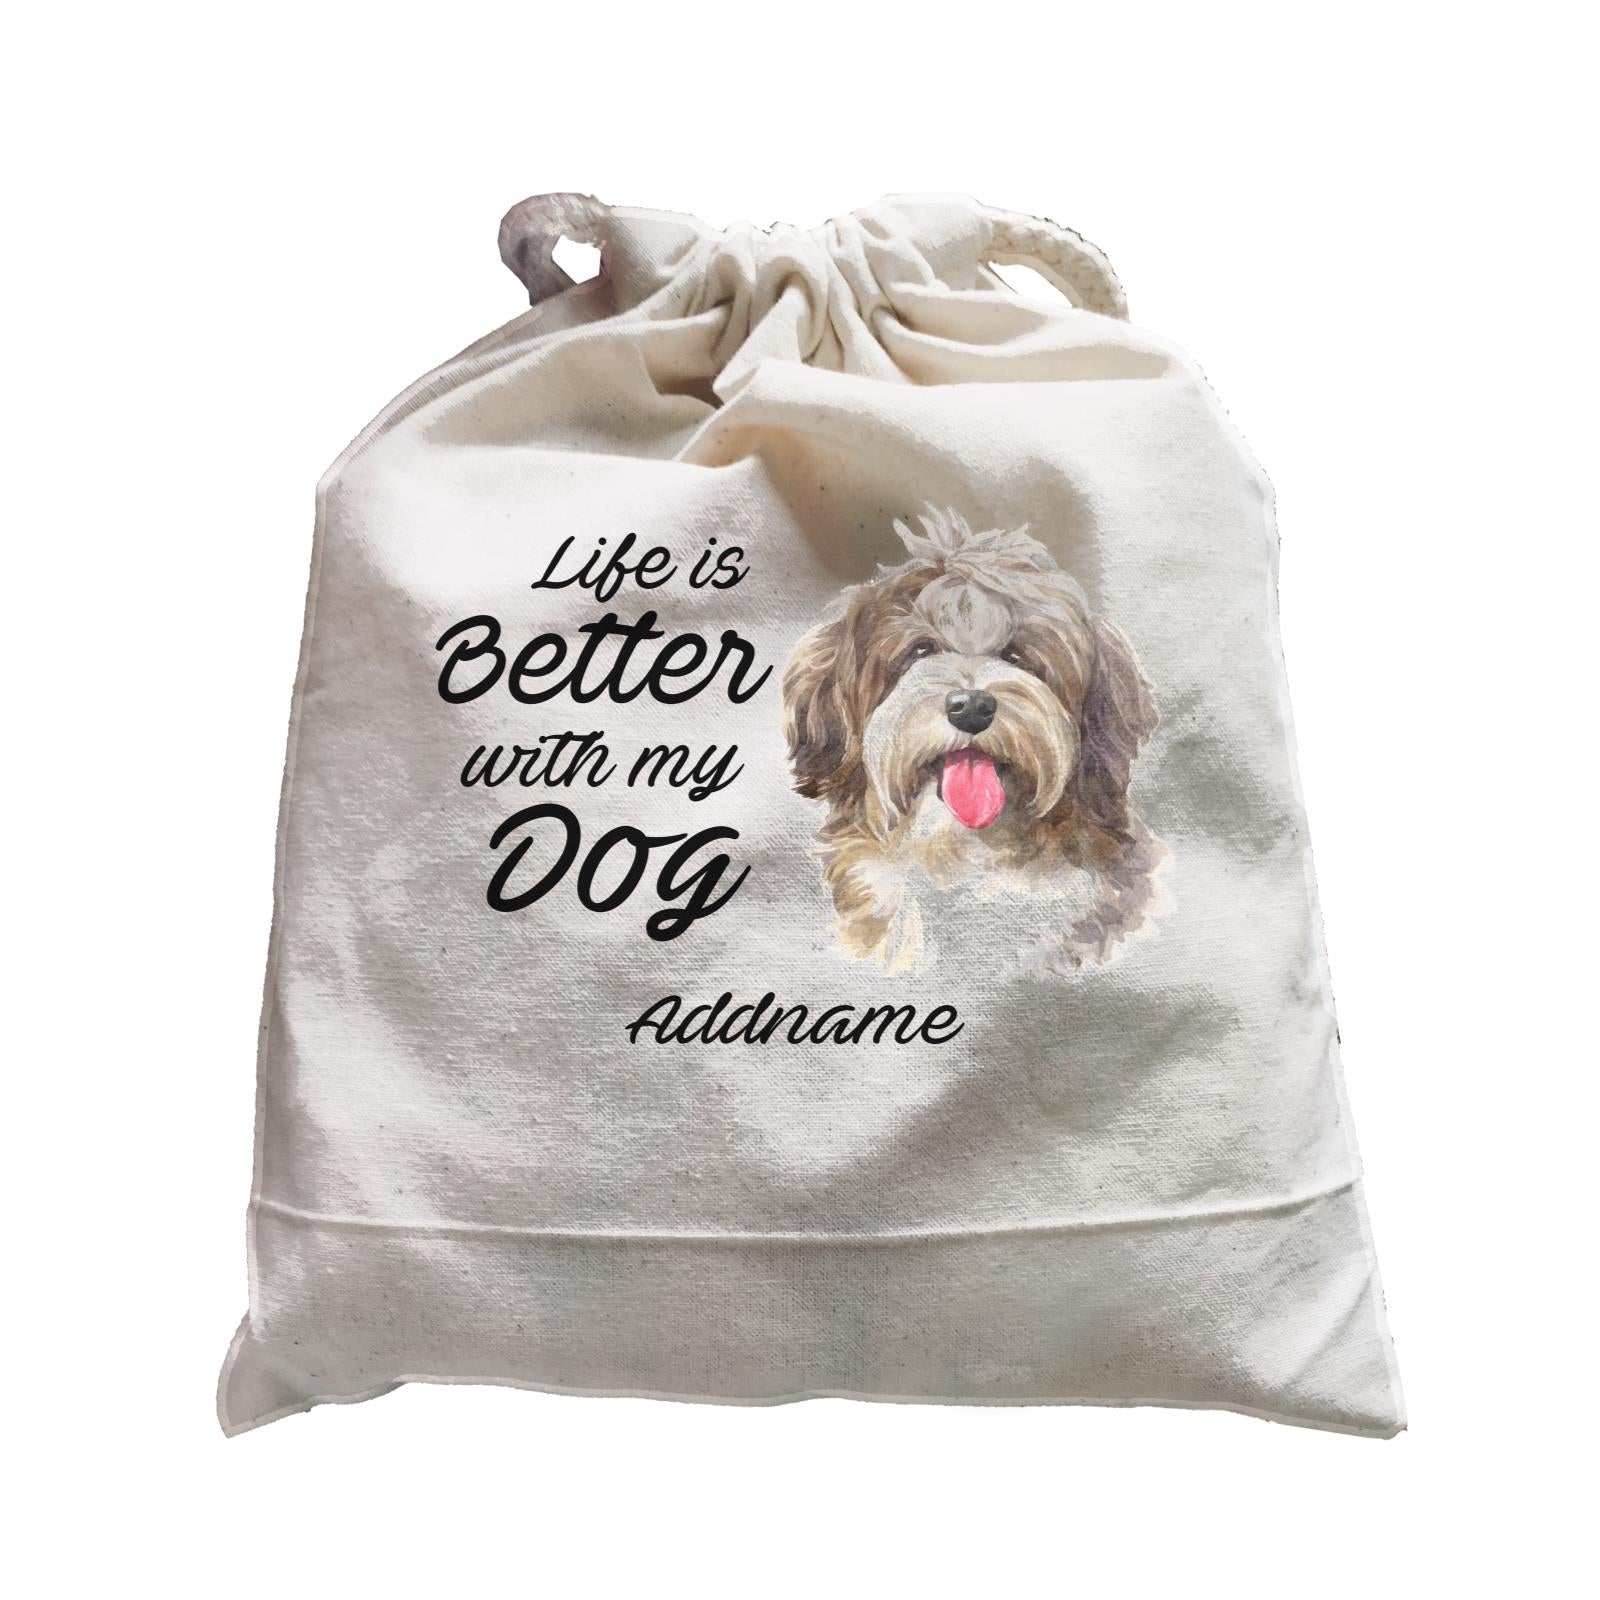 Watercolor Life is Better With My Dog Shaggy Havanese Addname Satchel